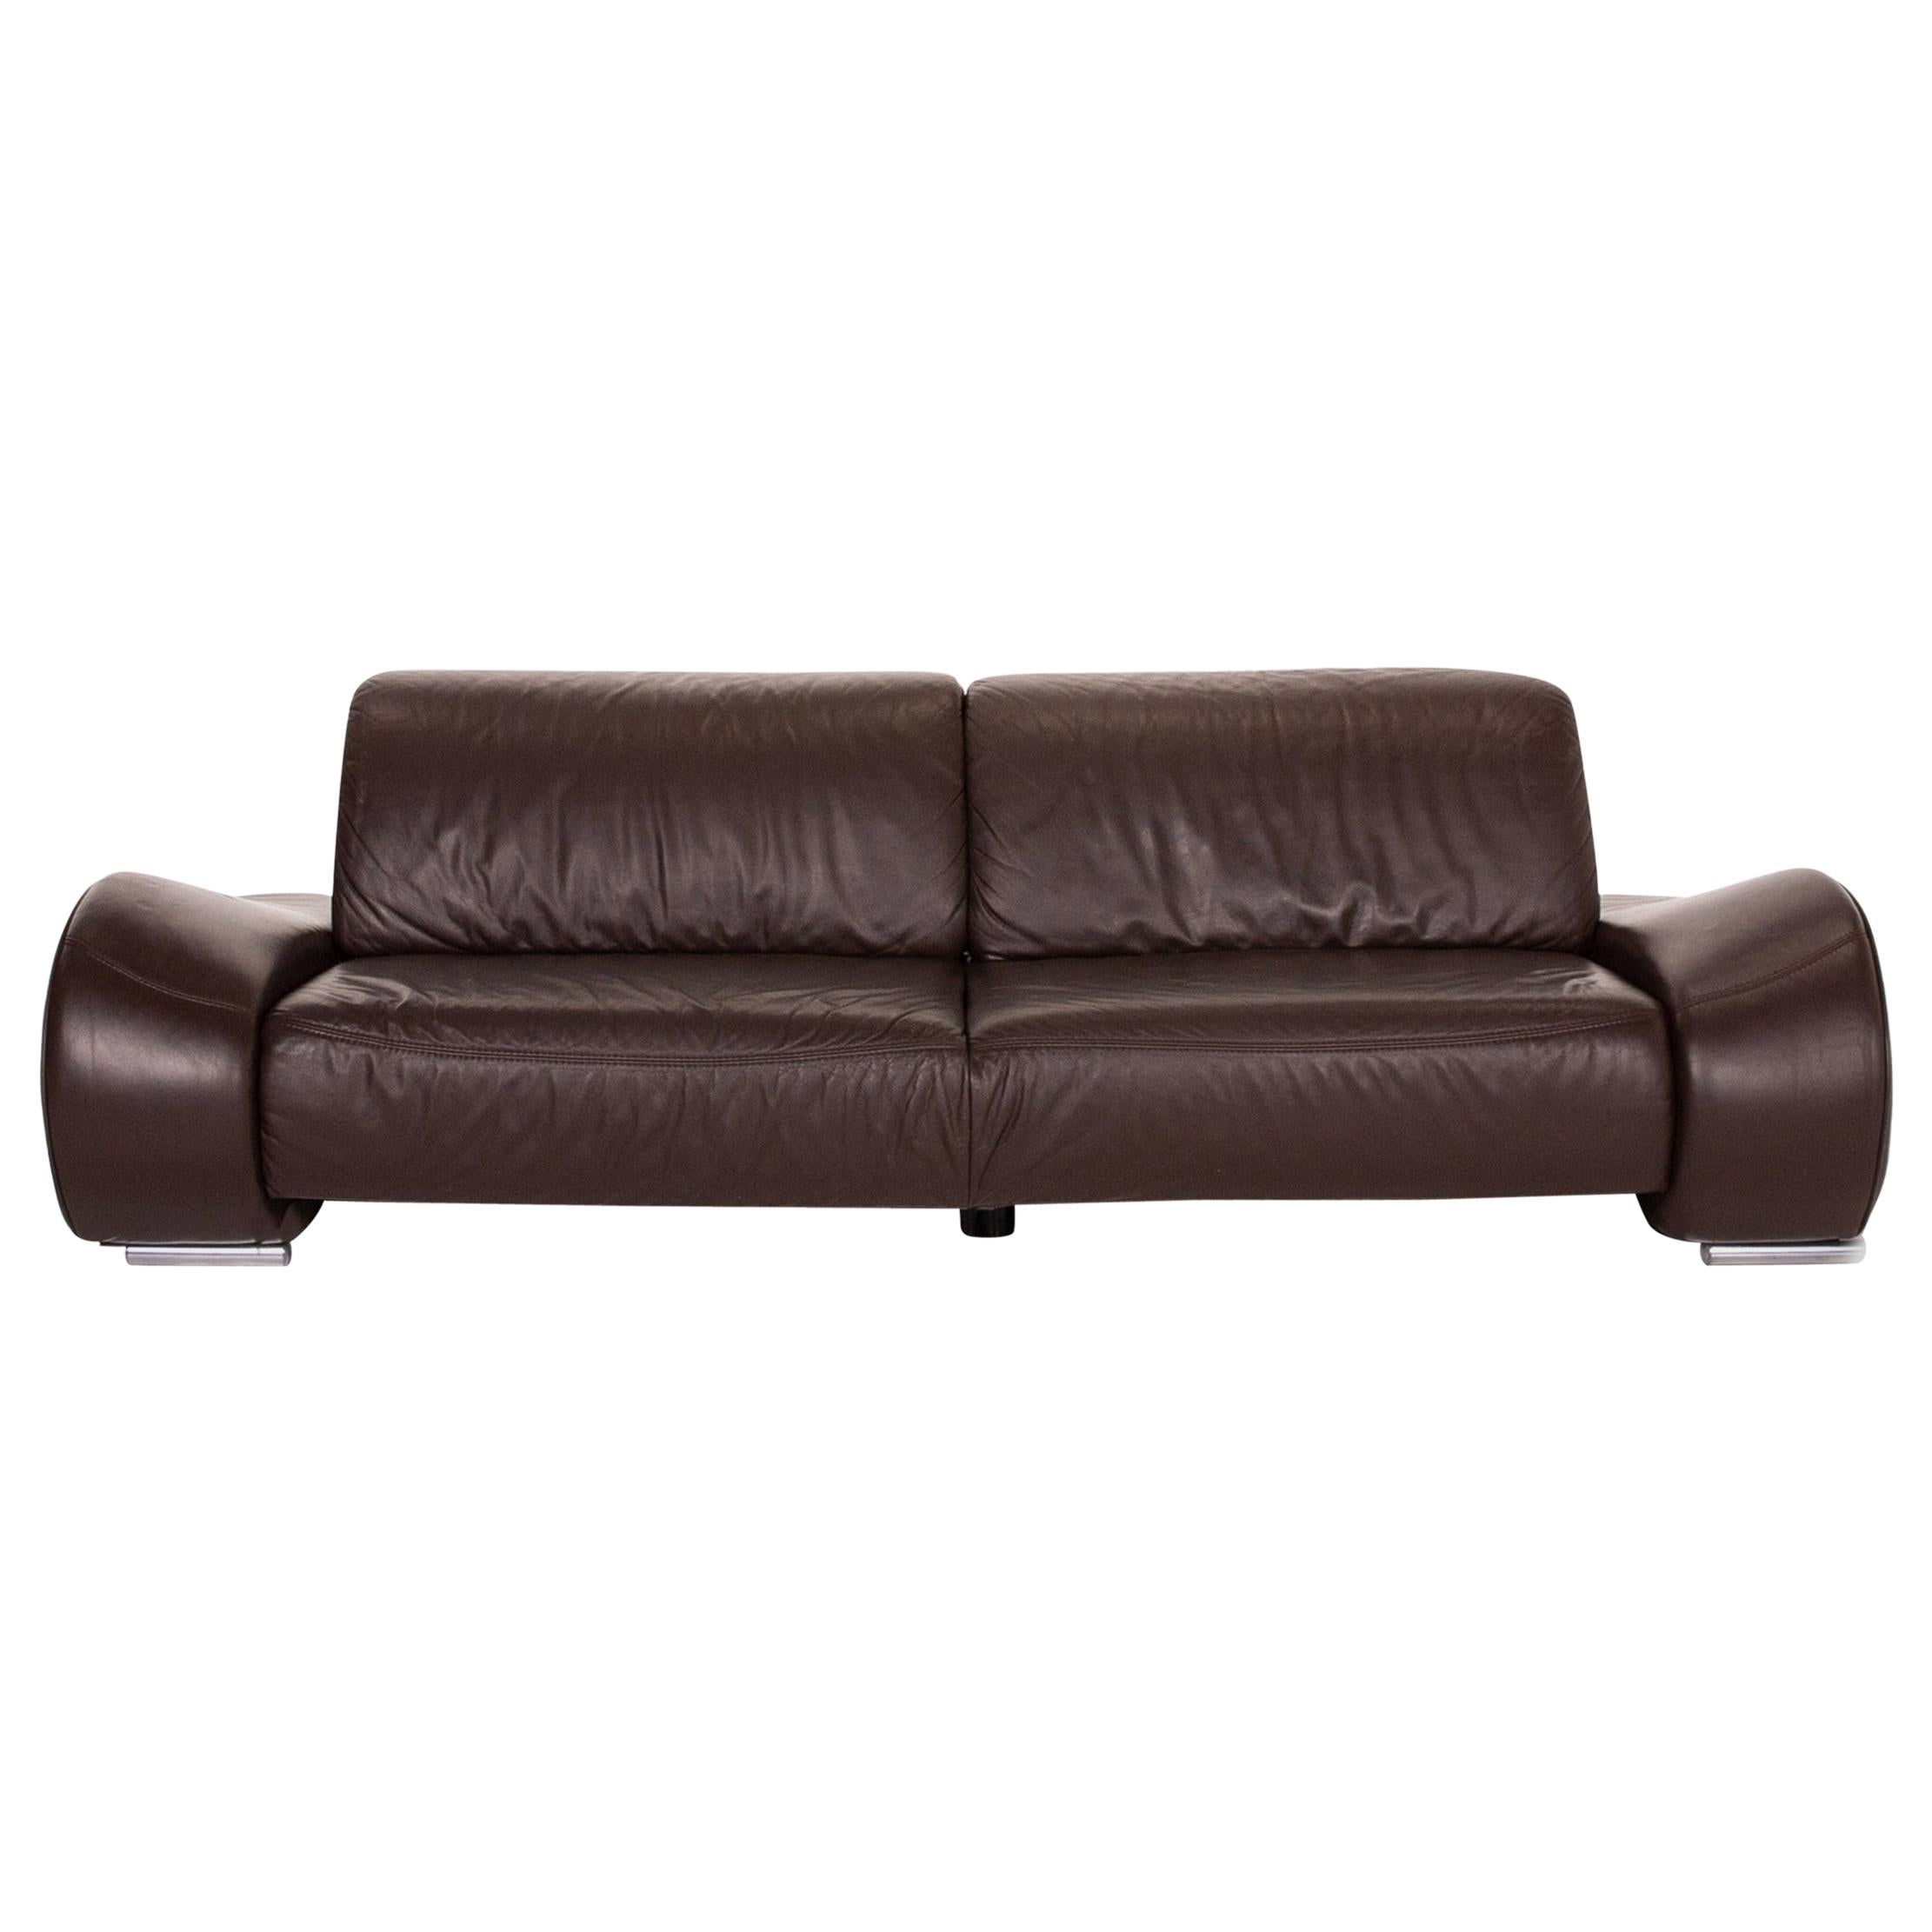 Sample Ring Leather Sofa Brown Dark Brown Three-Seat Couch